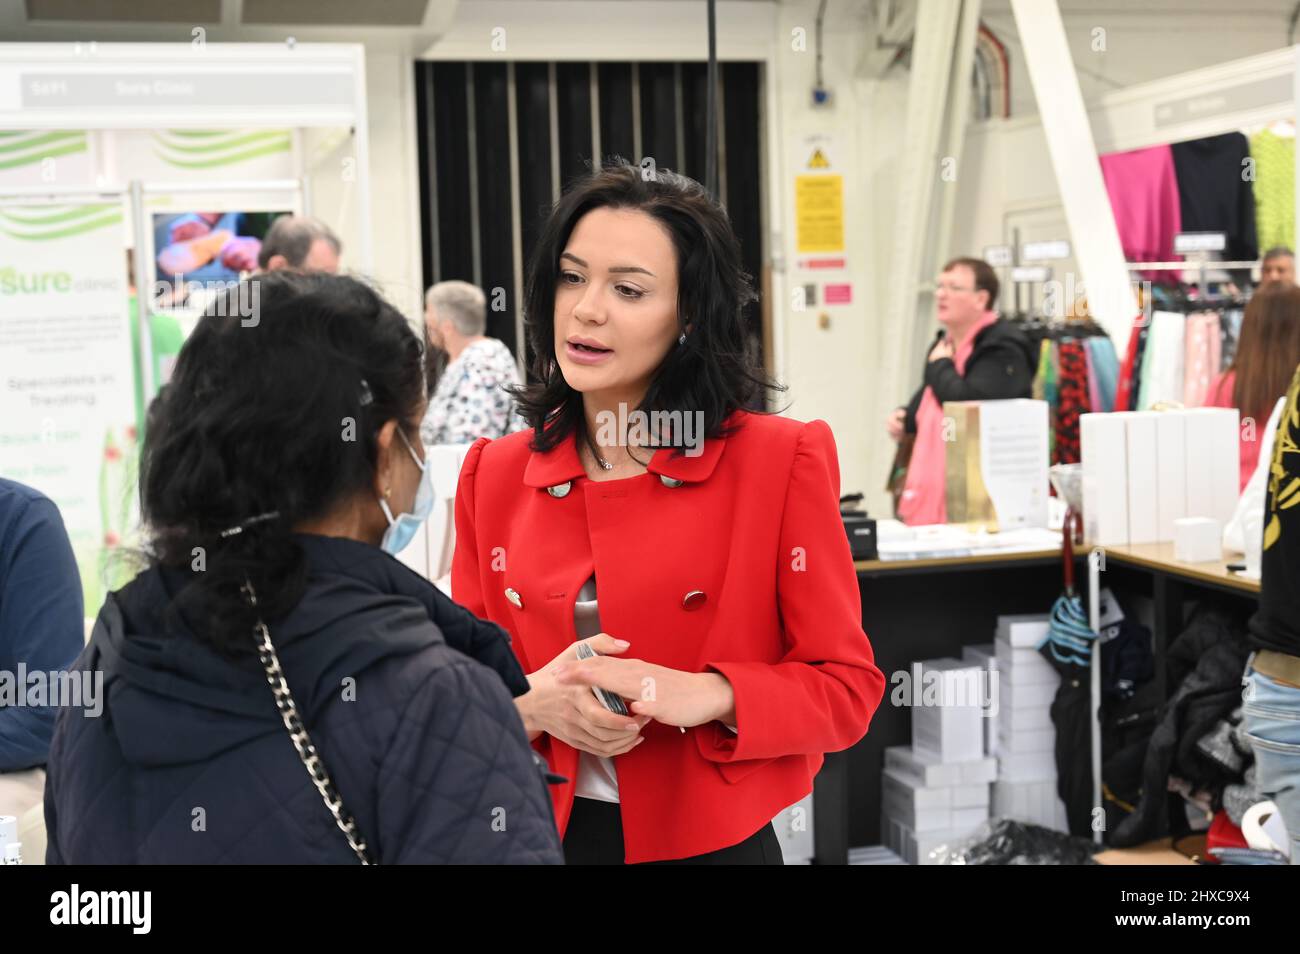 London, UK. 11 March 2022. Opatra exhibition at Ideal Home Show 2022 at Olympia London. Credit: Picture Capital/Alamy Live News Stock Photo